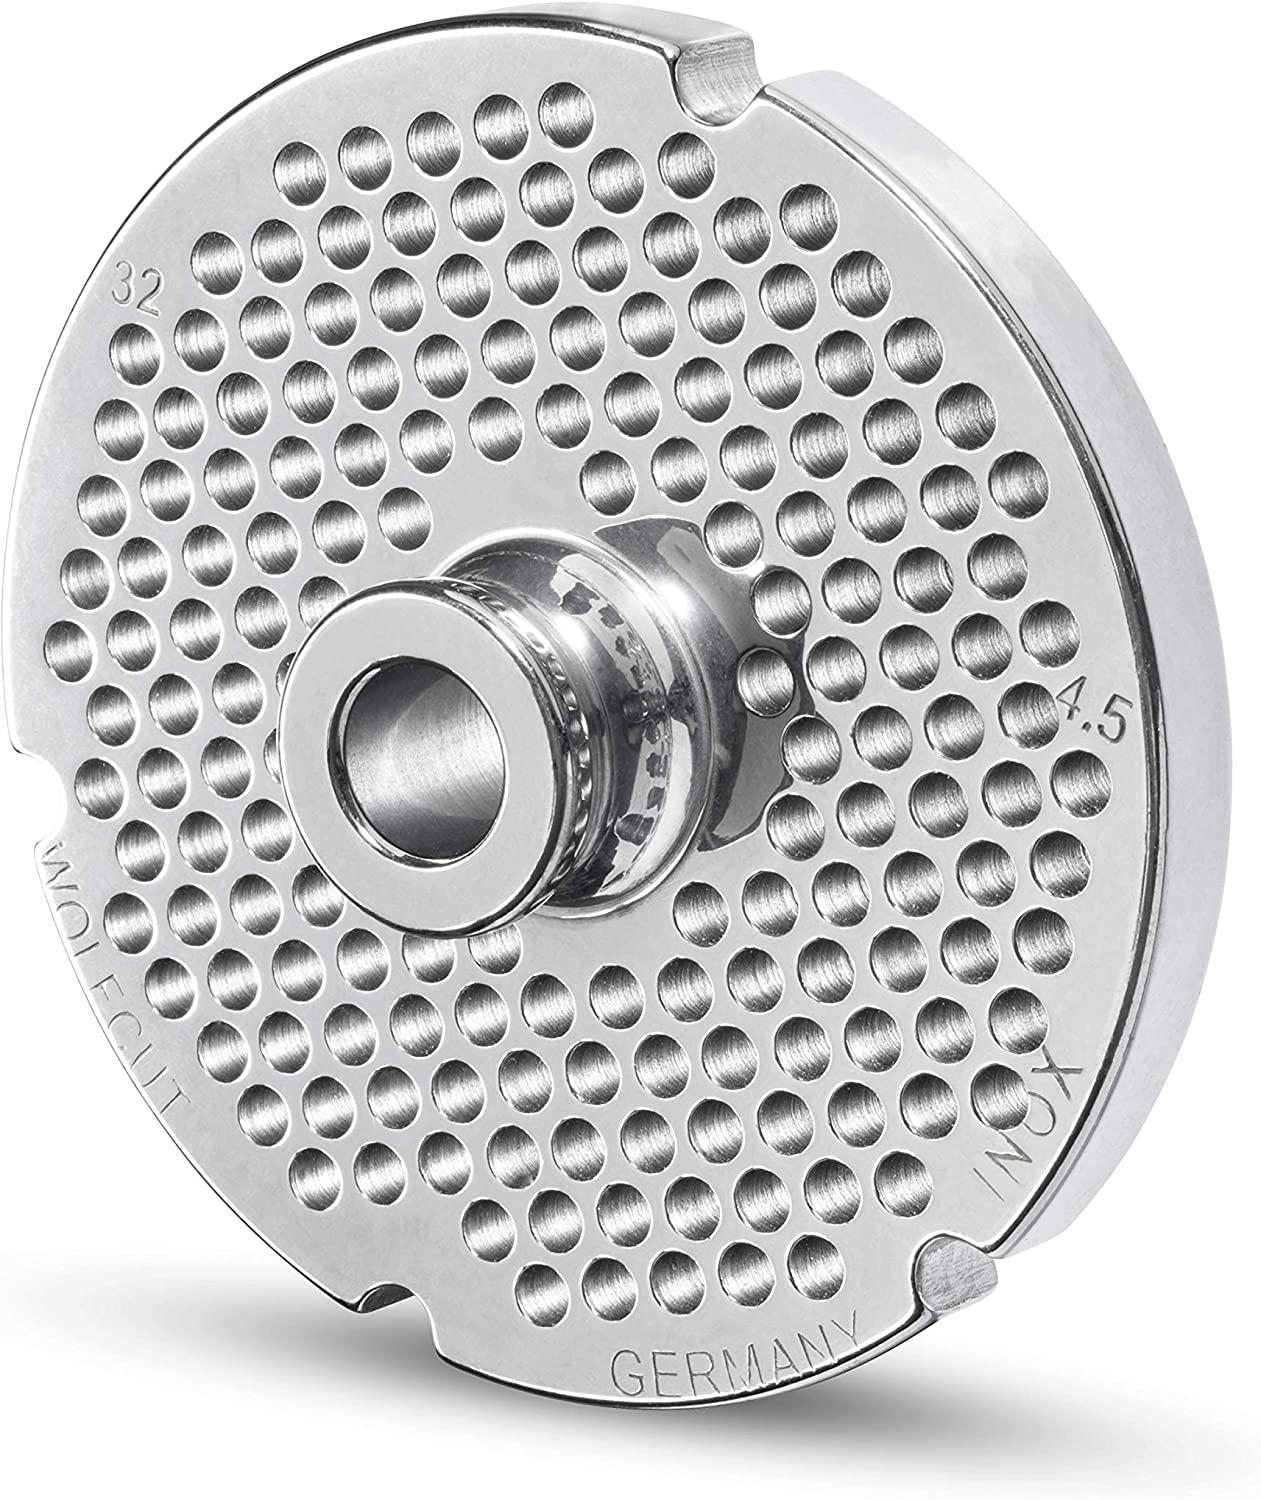 WolfCut Perforated disc with hub and 4 grooves for all standard meat grinder sizes 32 (4.5 mm)